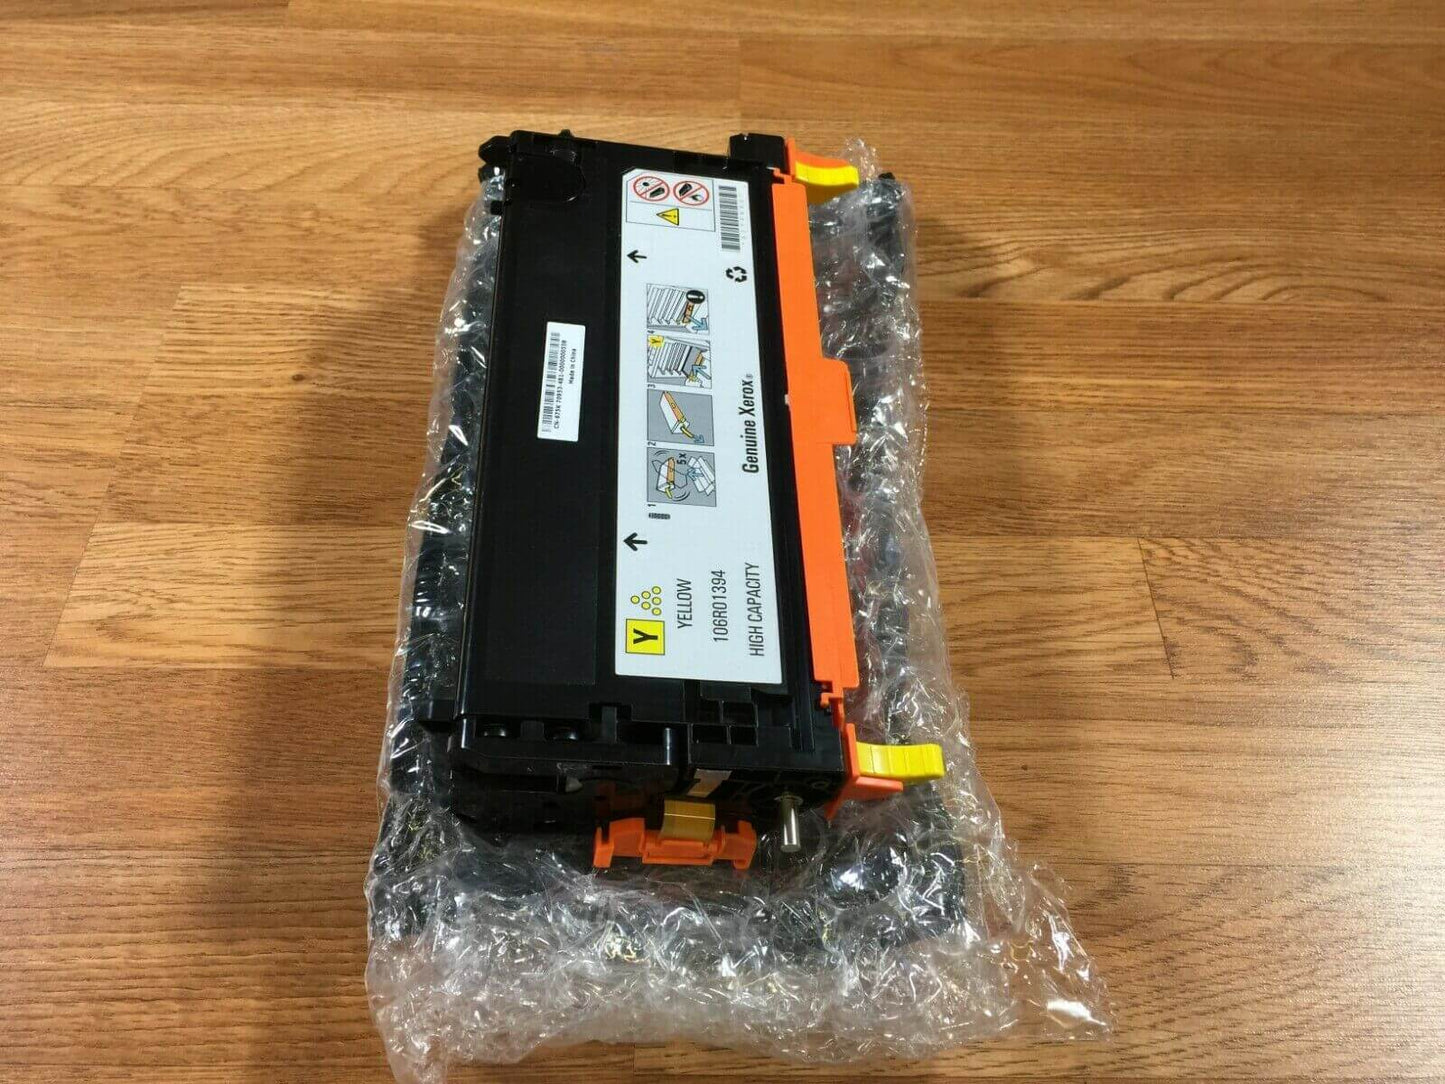 Genuine Xerox Phaser 6280 Yellow Toner 106R01394 - FedEx 2Day Air!! - copier-clearance-center